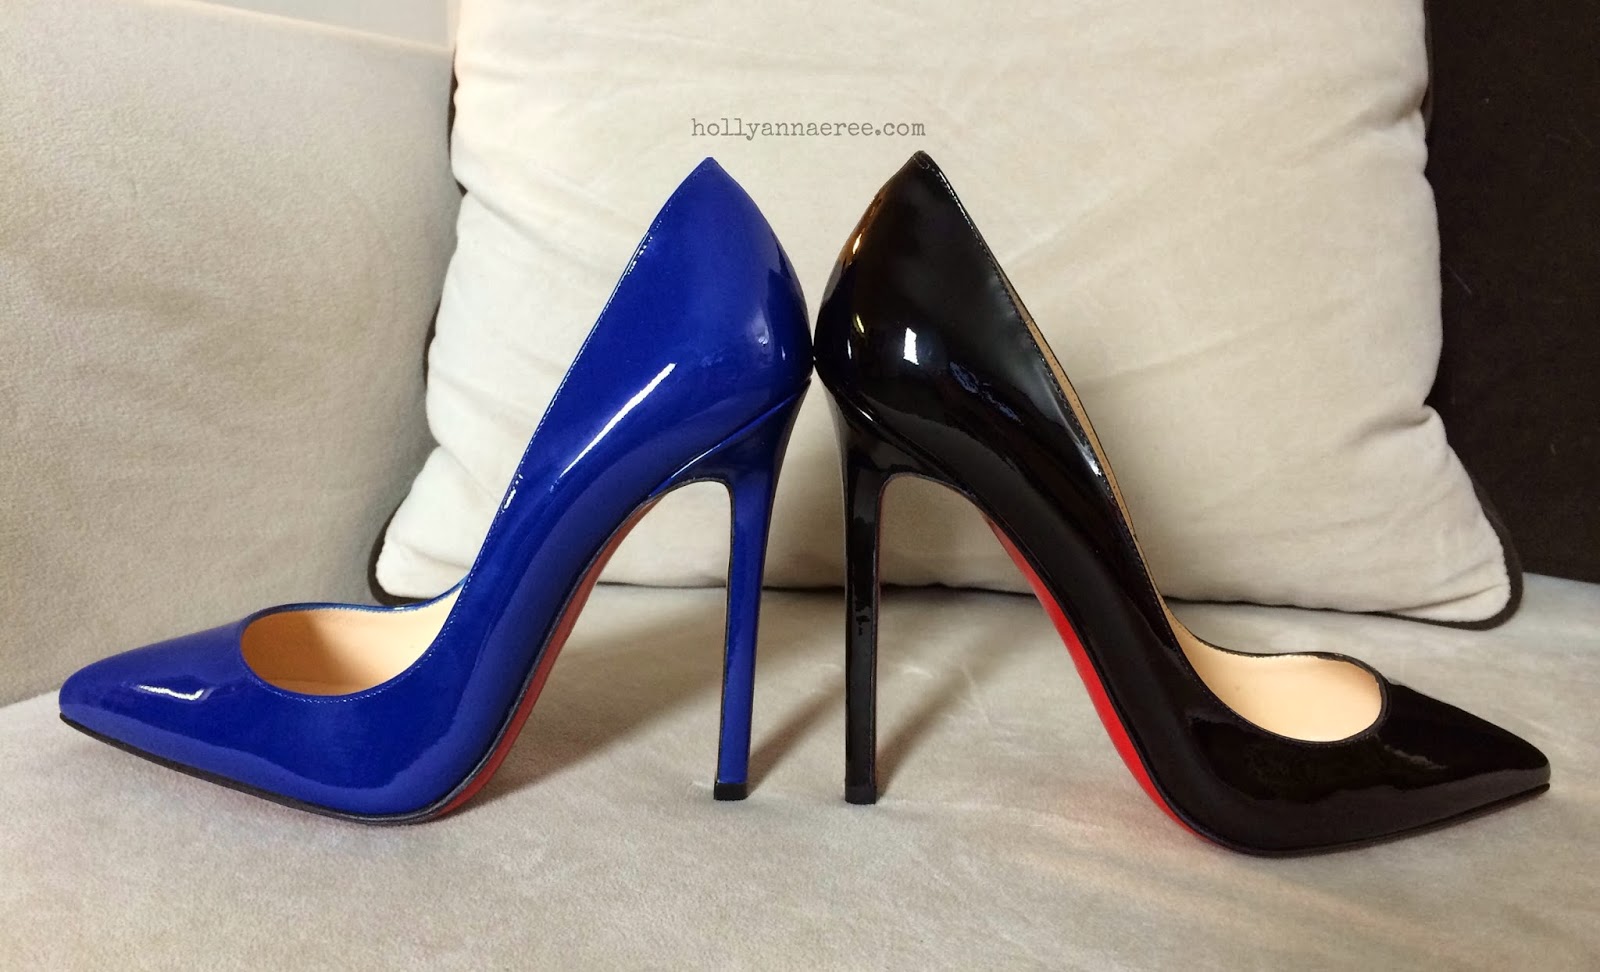 Land opnå indsigelse Holly Ann-AeRee 2.0: Changes to the Christian Louboutin Pigalle 120mm -  WHYYY?!?! Comparison Photos (pic heavy)